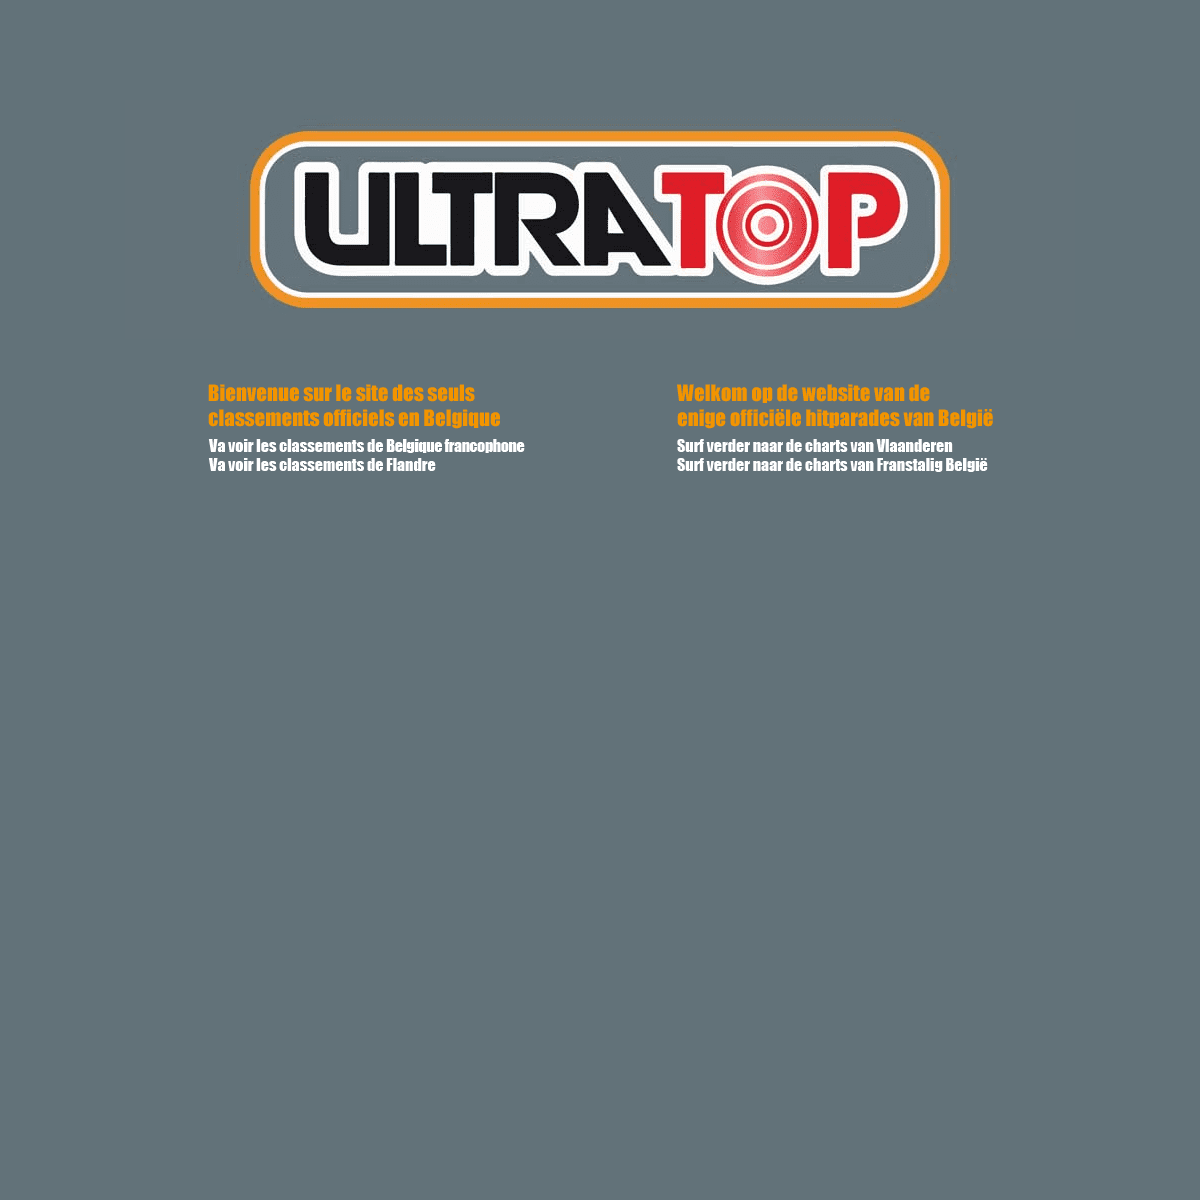 A complete backup of https://ultratop.be